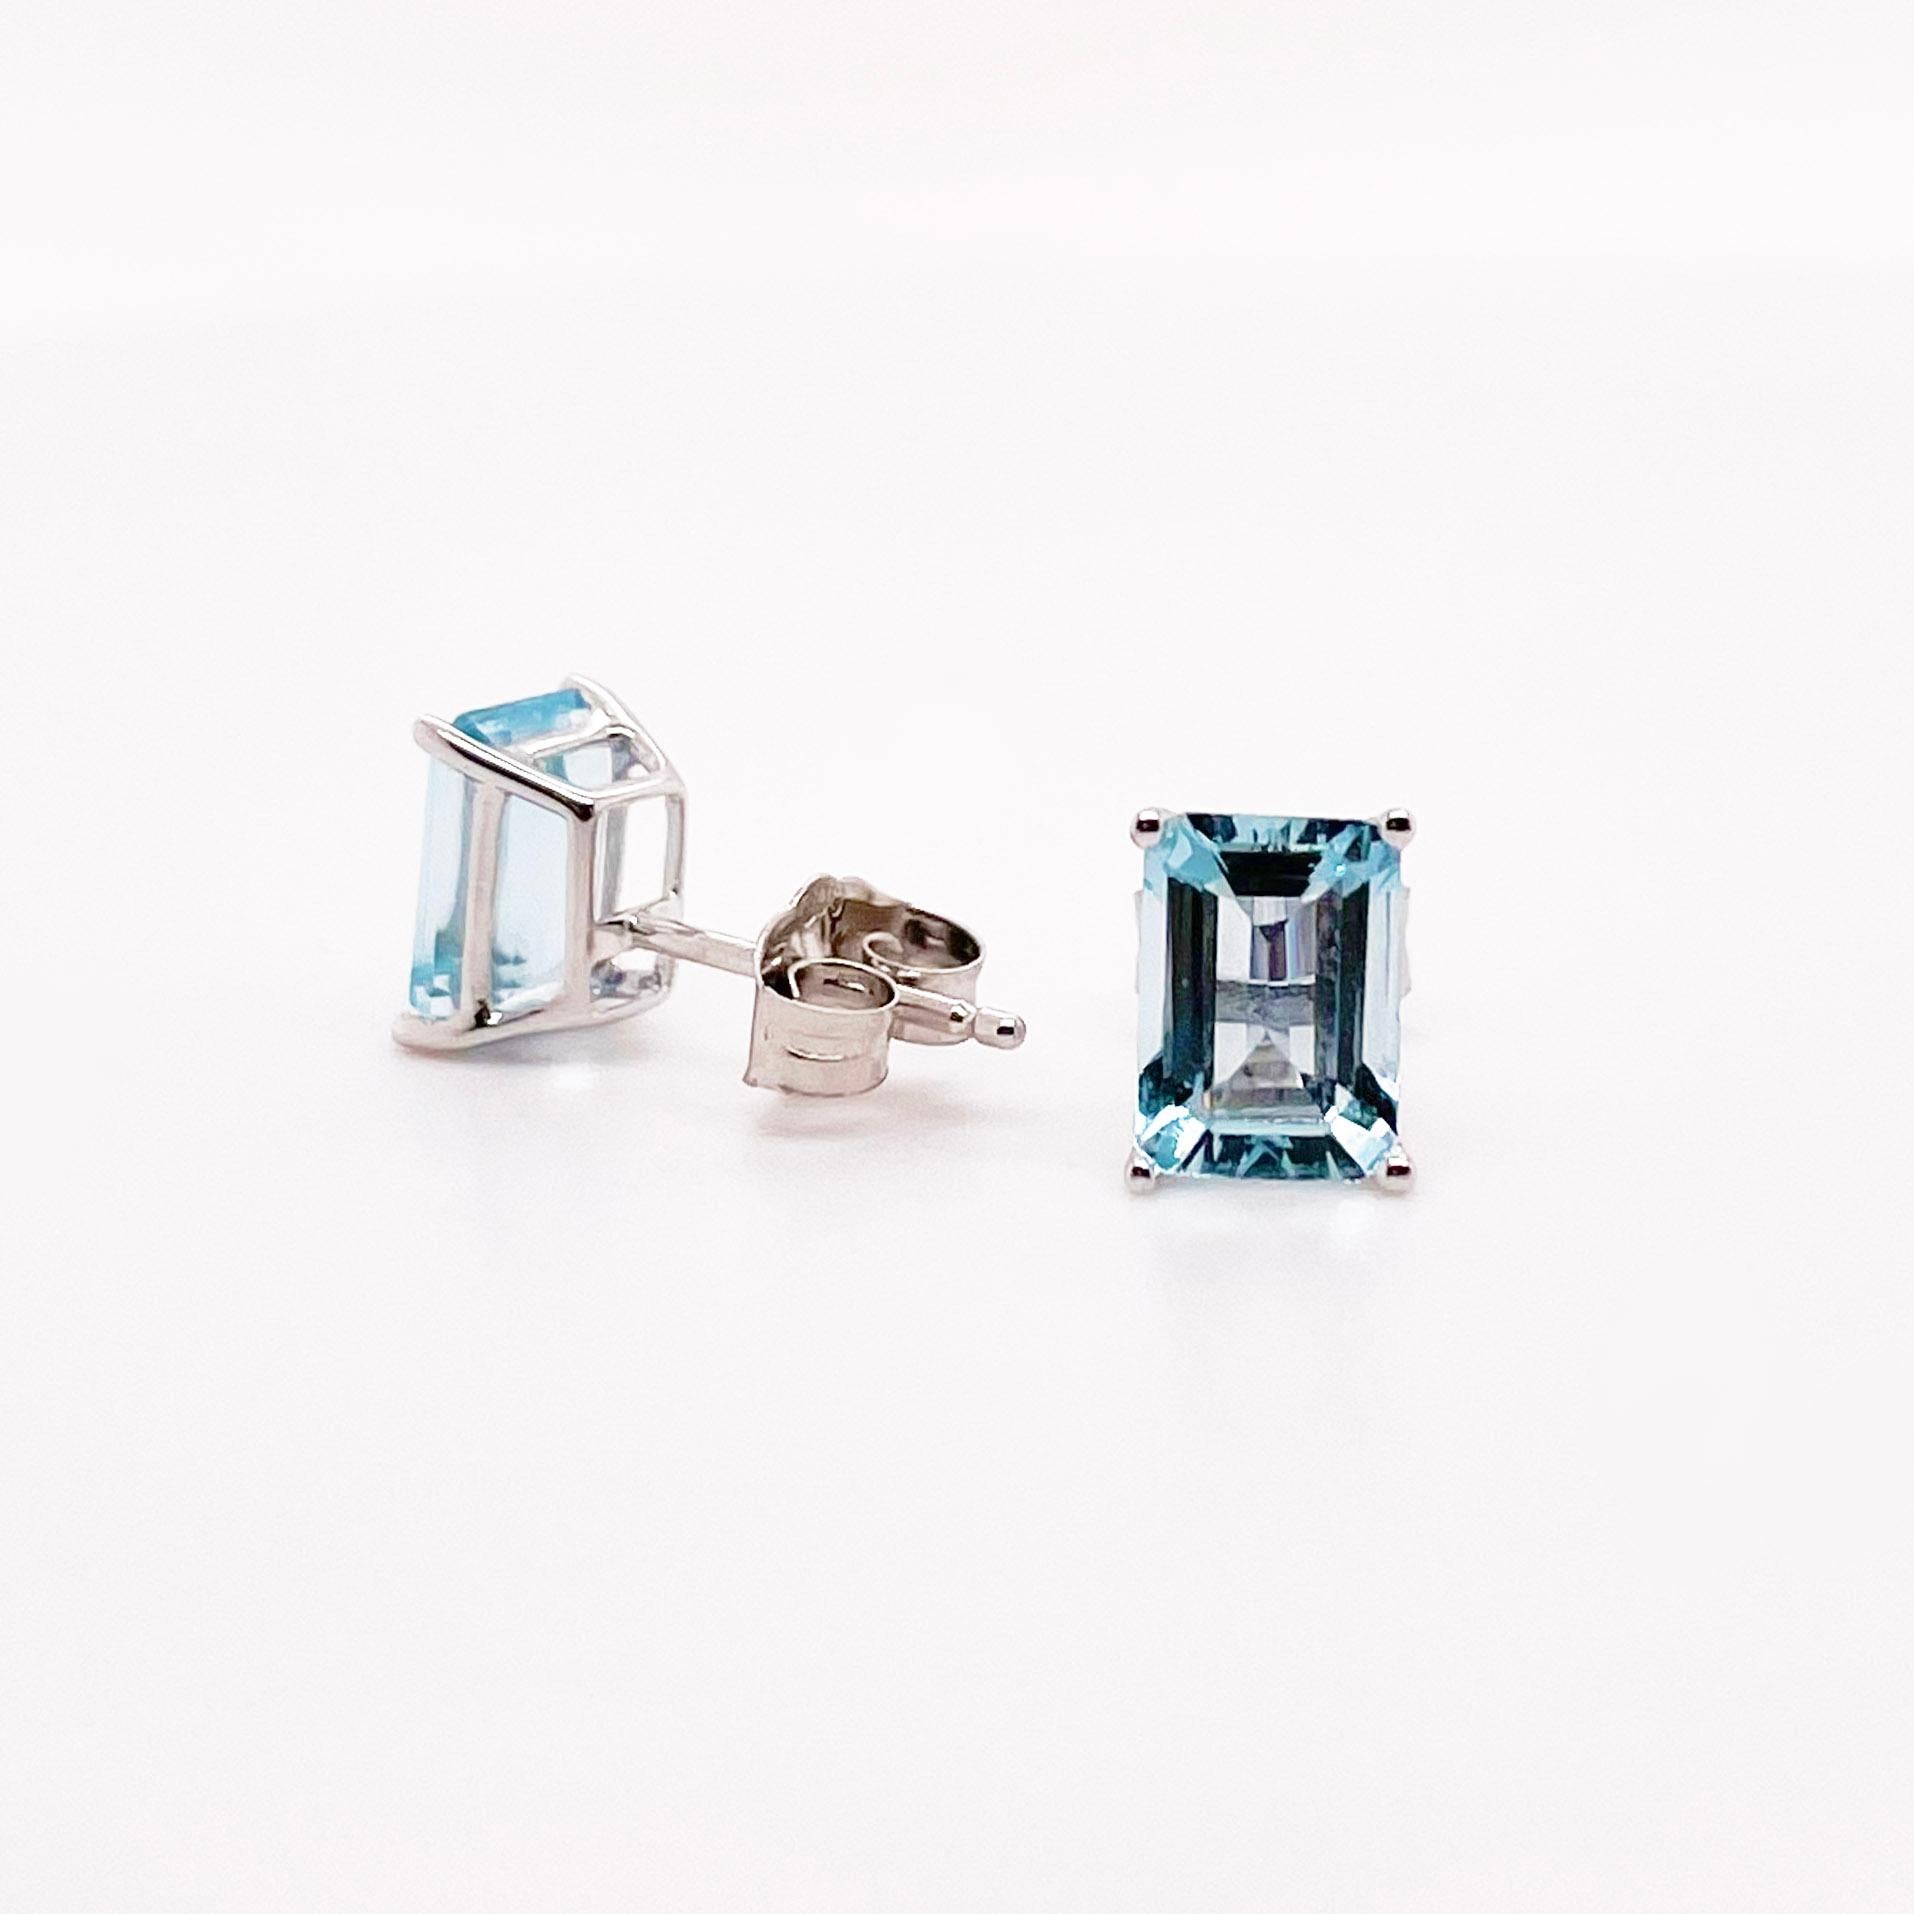 Aquamarines, aquas, genuine and natural gemstones. These matching aquas are exquisite and would look great on any earlobe. They are delicately set in a four prong basket with a post and back on each. To find two aquas that match in color and size is